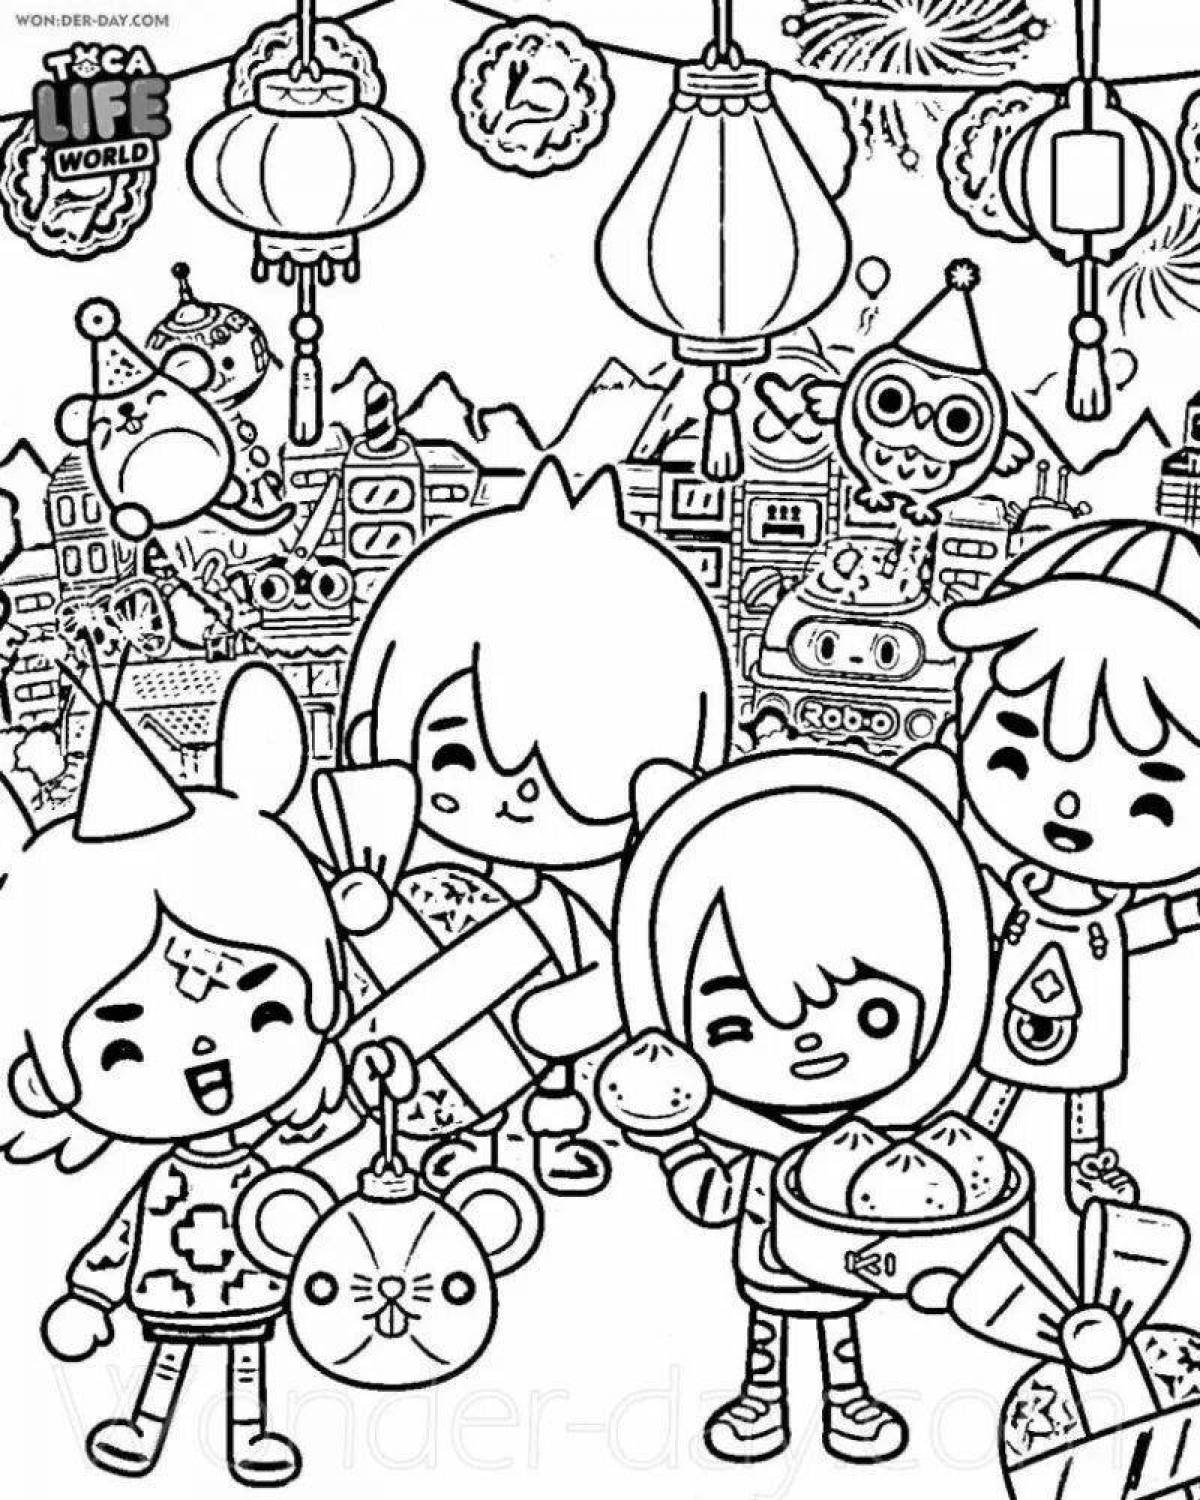 Charming current world coloring page